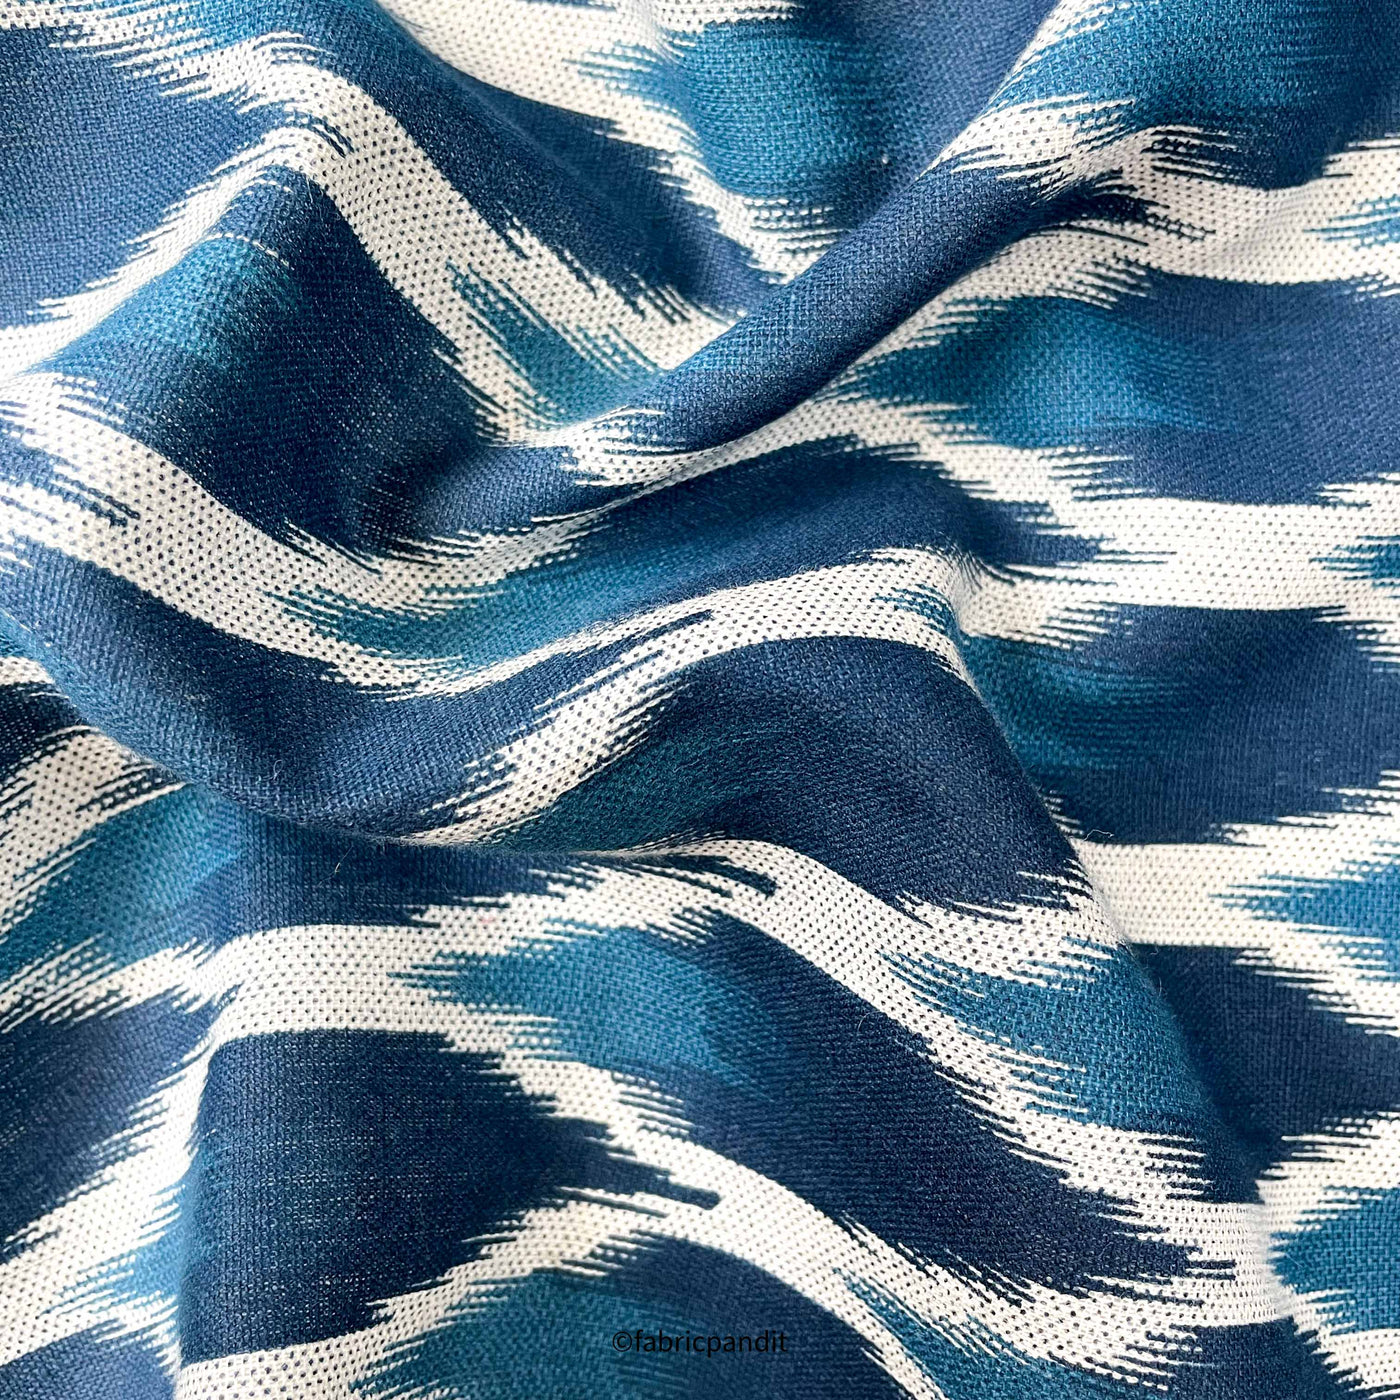 Printed Cotton Linen Fabric Cut Piece (CUT PIECE) Blue & White Shaded Ikat Hand Block Printed Pure Cotton Linen Fabric (Width 42 inches)